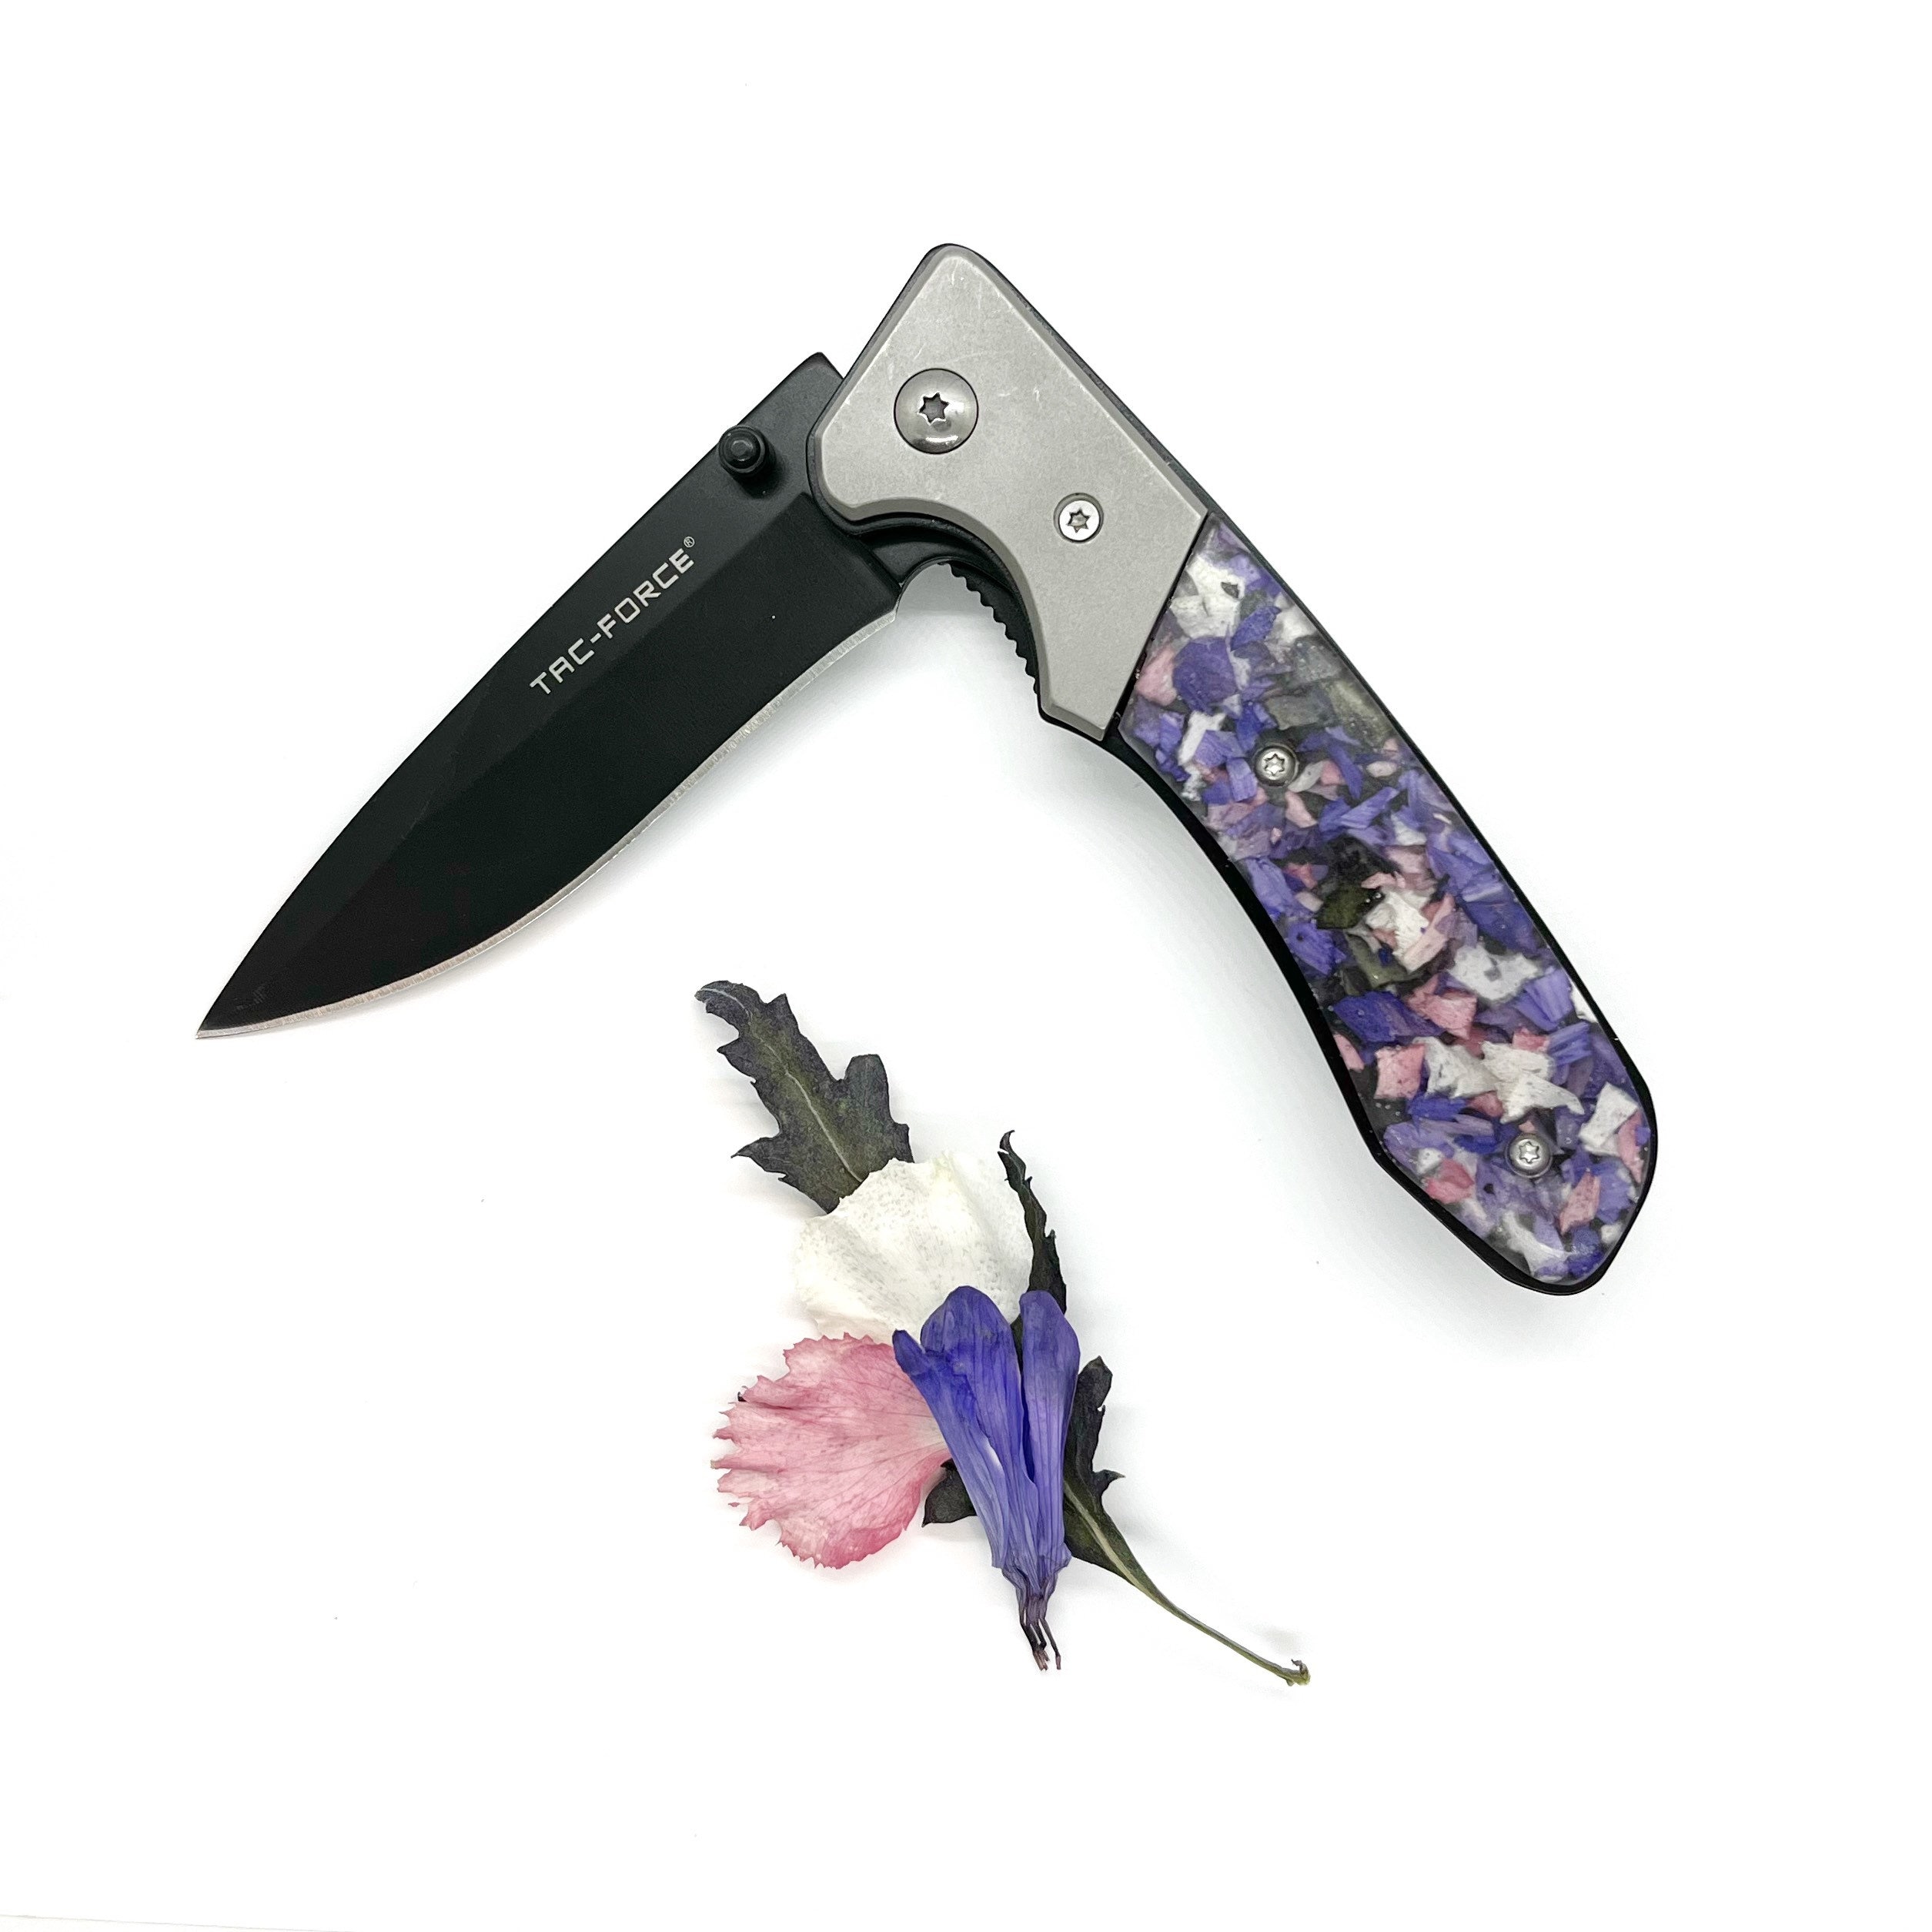 Large Custom Decorative Dried Pressed Flower Floral Blade Kitchen Knife,  One Sided or Double Sided Design Unique Home Decor 4 Styles 